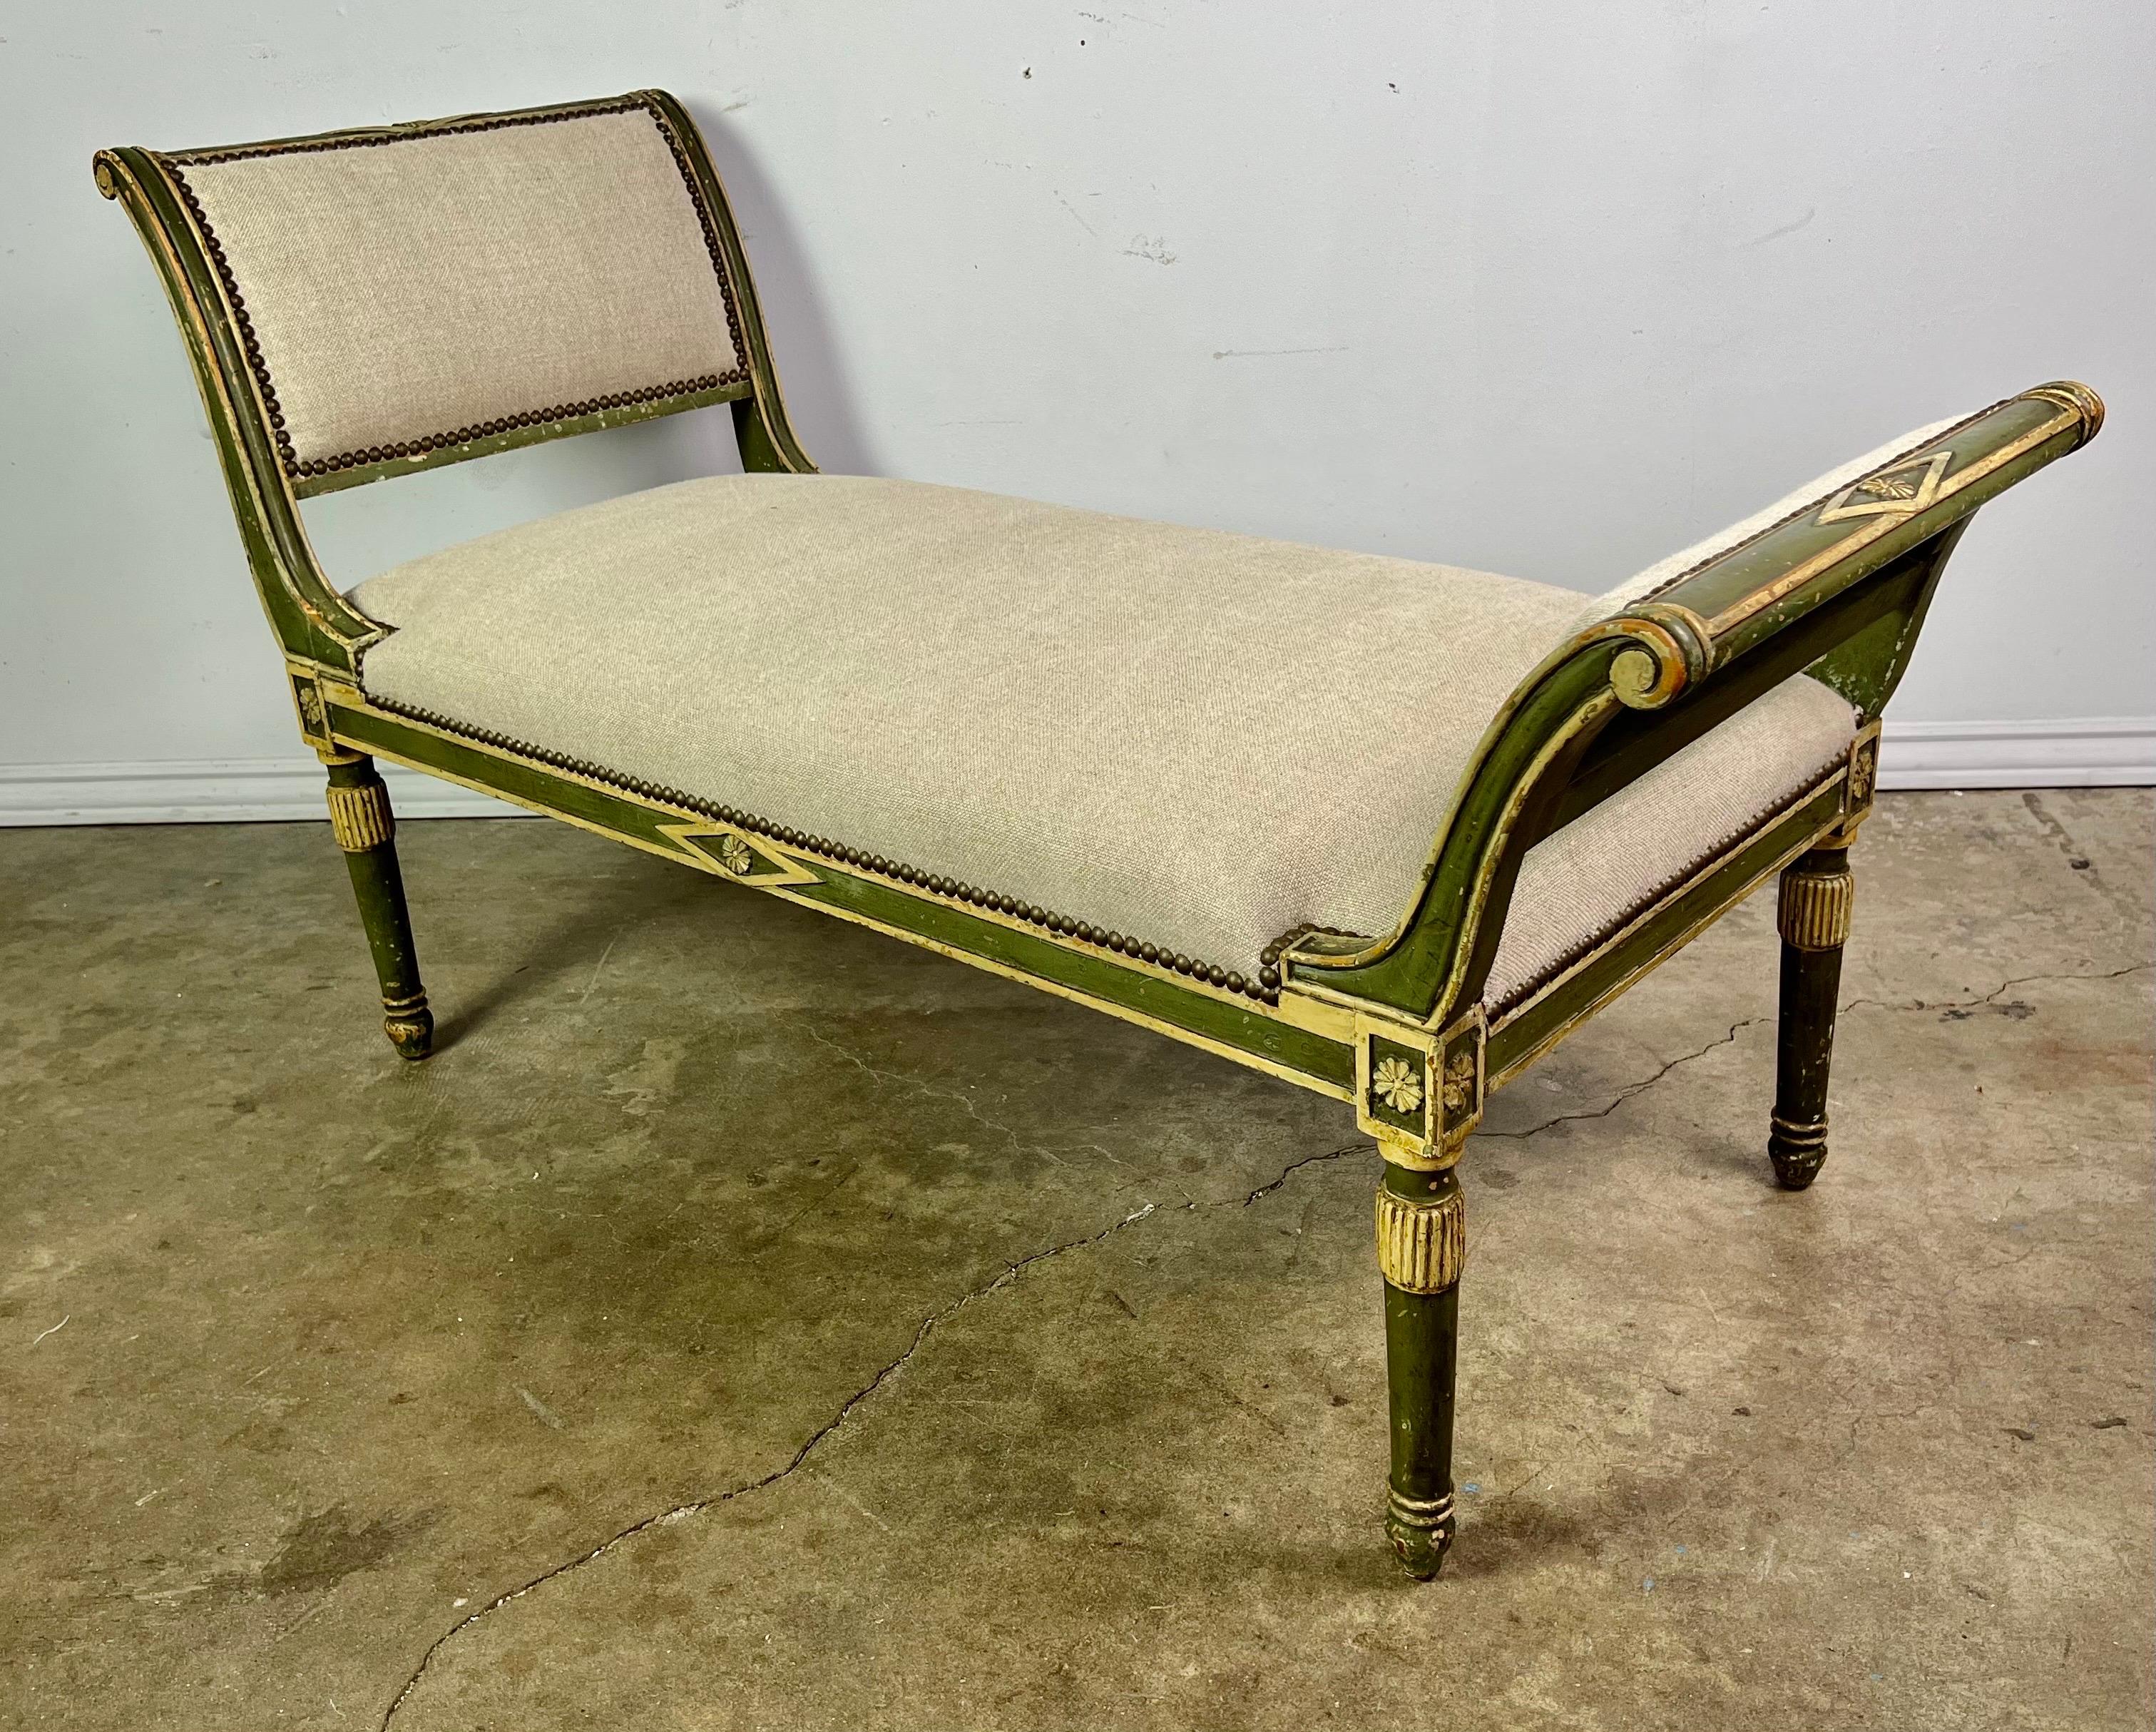 Neoclassical Revival Painted Neoclassical Style Painted Bench C. 1920 For Sale